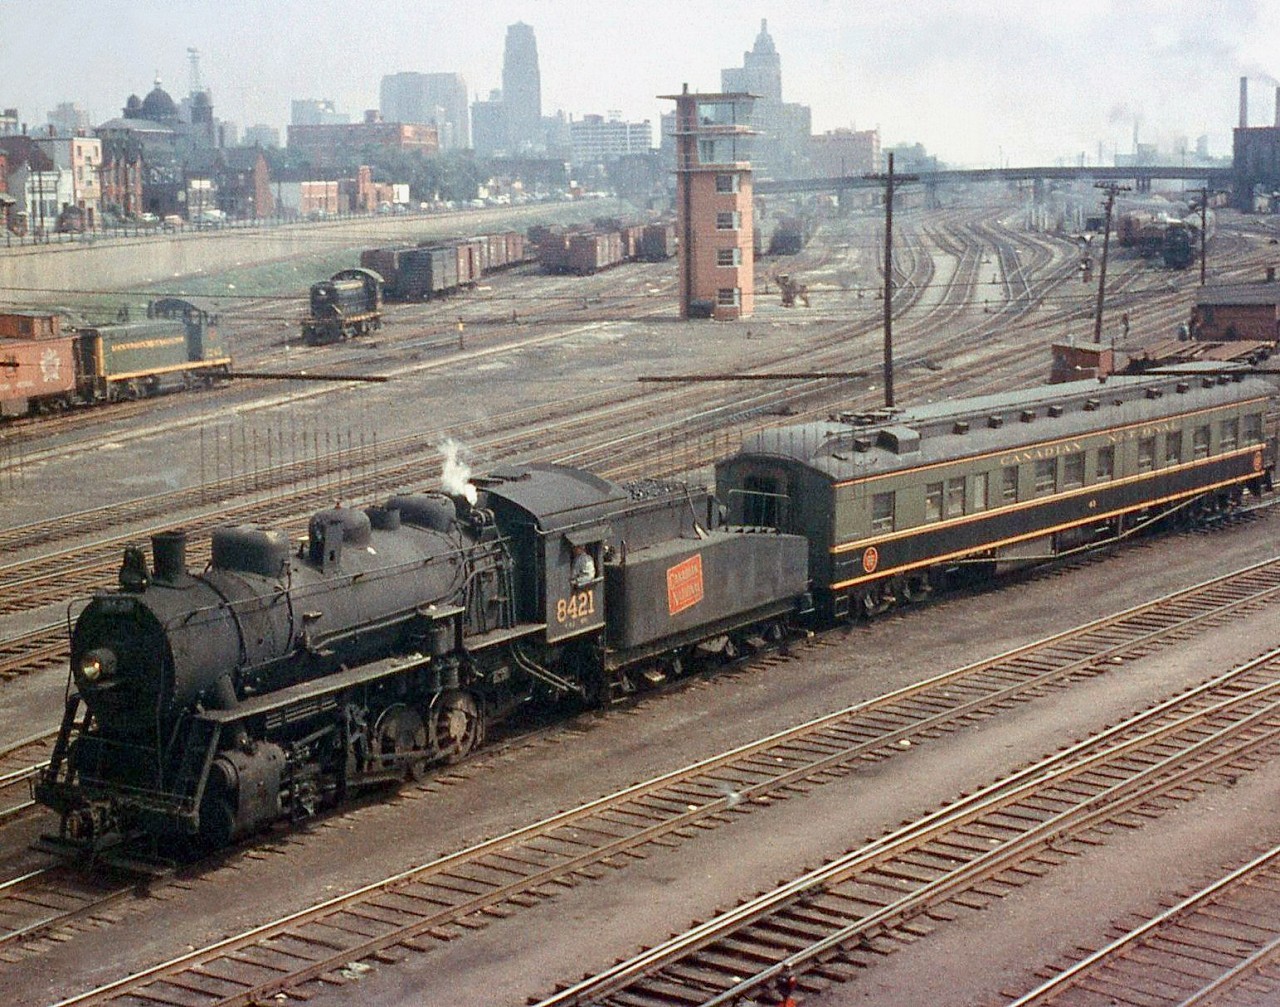 Steam era action at Bathurst Street: Canadian National 0-8-0 8421 switches a heavyweight business car around the Spadina Coachyard (off to the right) at Bathurst Street bridge. New GMD SW1200RS and ALCO/MLW S-series diesel switchers work the freight-only Bathurst Street yards to the left. The CN Spadina Roundhouses' coaling tower is visible to the upper right, where dozens of steam and diesel power were maintained for service out of downtown Toronto. Also of note is the relatively new looking brick yard tower (identical ones were at Mimico and Don Yard, all demolished today). The Toronto skyline 50+ years ago looks much different than it does today, with the tallest building being the Canadian Commerce Bank Building (which was also the tallest building in the British Commonwealth). It held this distinction from 1931 to 1962, and was 69 feet taller than the Canadian Pacific's Royal York Hotel, also visible here above the yard tower.  CNR (or GTW) 8421 shown here was one of six P5j 0-8-0 switch engines built by Brooks, purchased from original owner Buffalo Creek Railroad in 1947 and assigned Grand Trunk 8400-series numbers. "GTW" 8421 (however it's shown here sporting CN lettering on the tender's wafer logo) is former BCK 27, and operated in GTW/CN service with its former owner's number and lettering after purchase until becoming 8421. Most photos show these steamers around downtown Toronto, switching the freight and passenger yards in the area. All were retired by the end of the steam era in Canada, and scrapped.